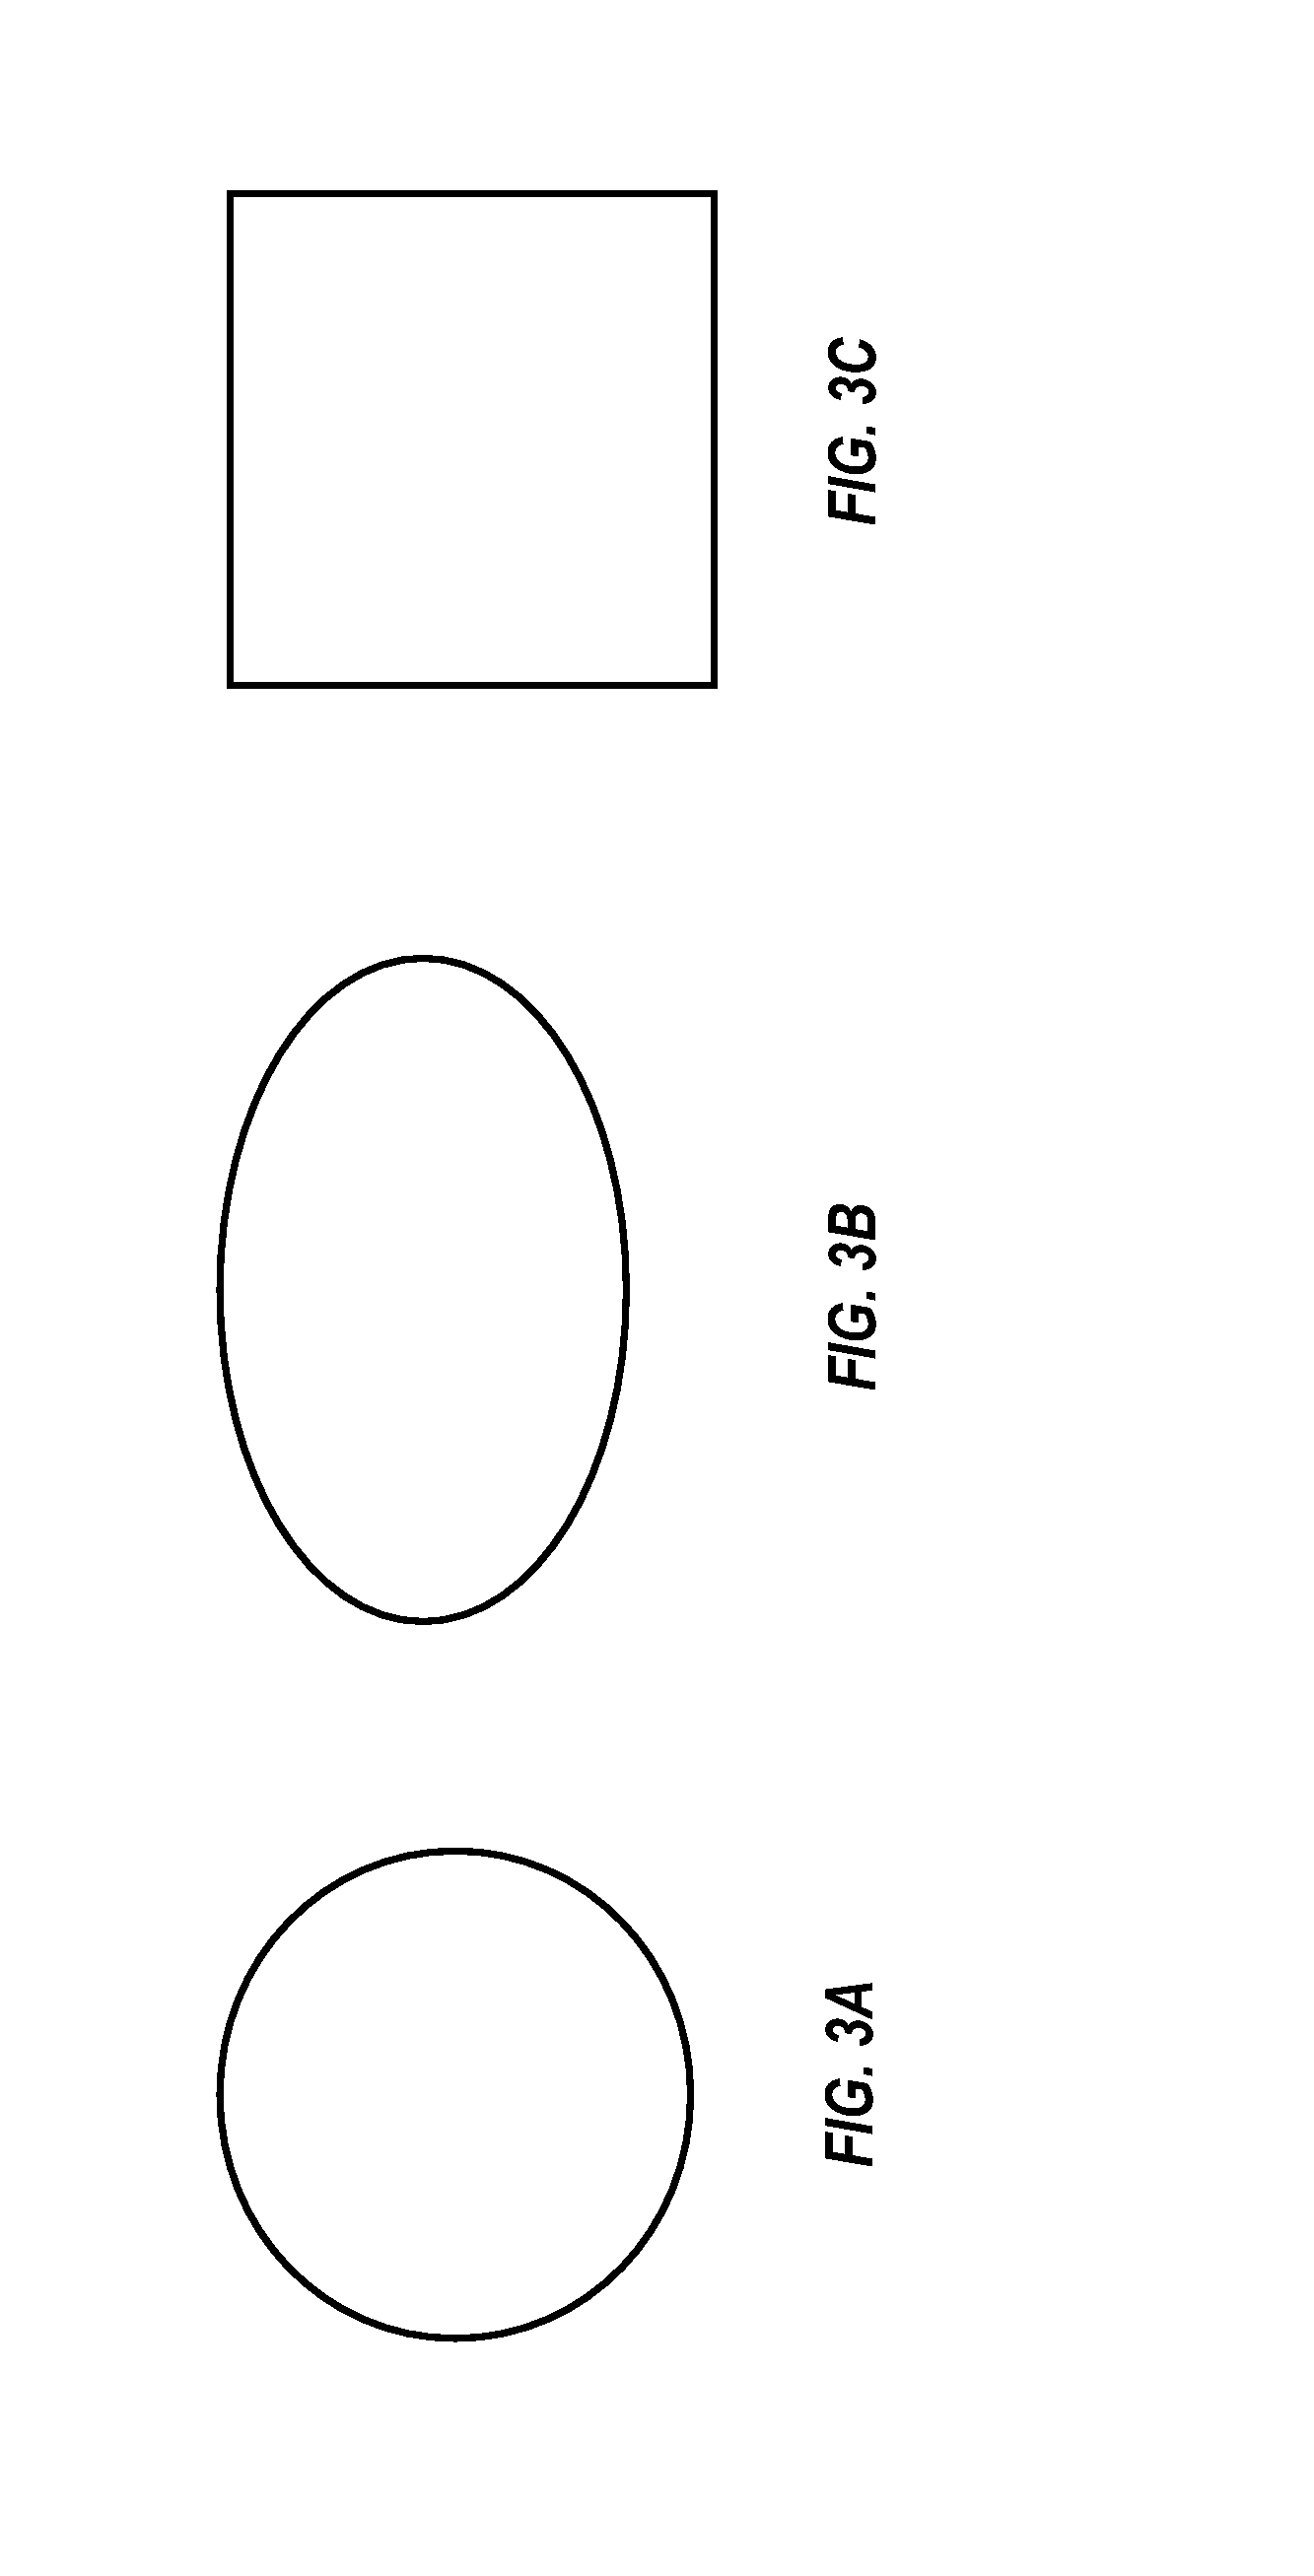 Micro-helix antenna and methods for making same